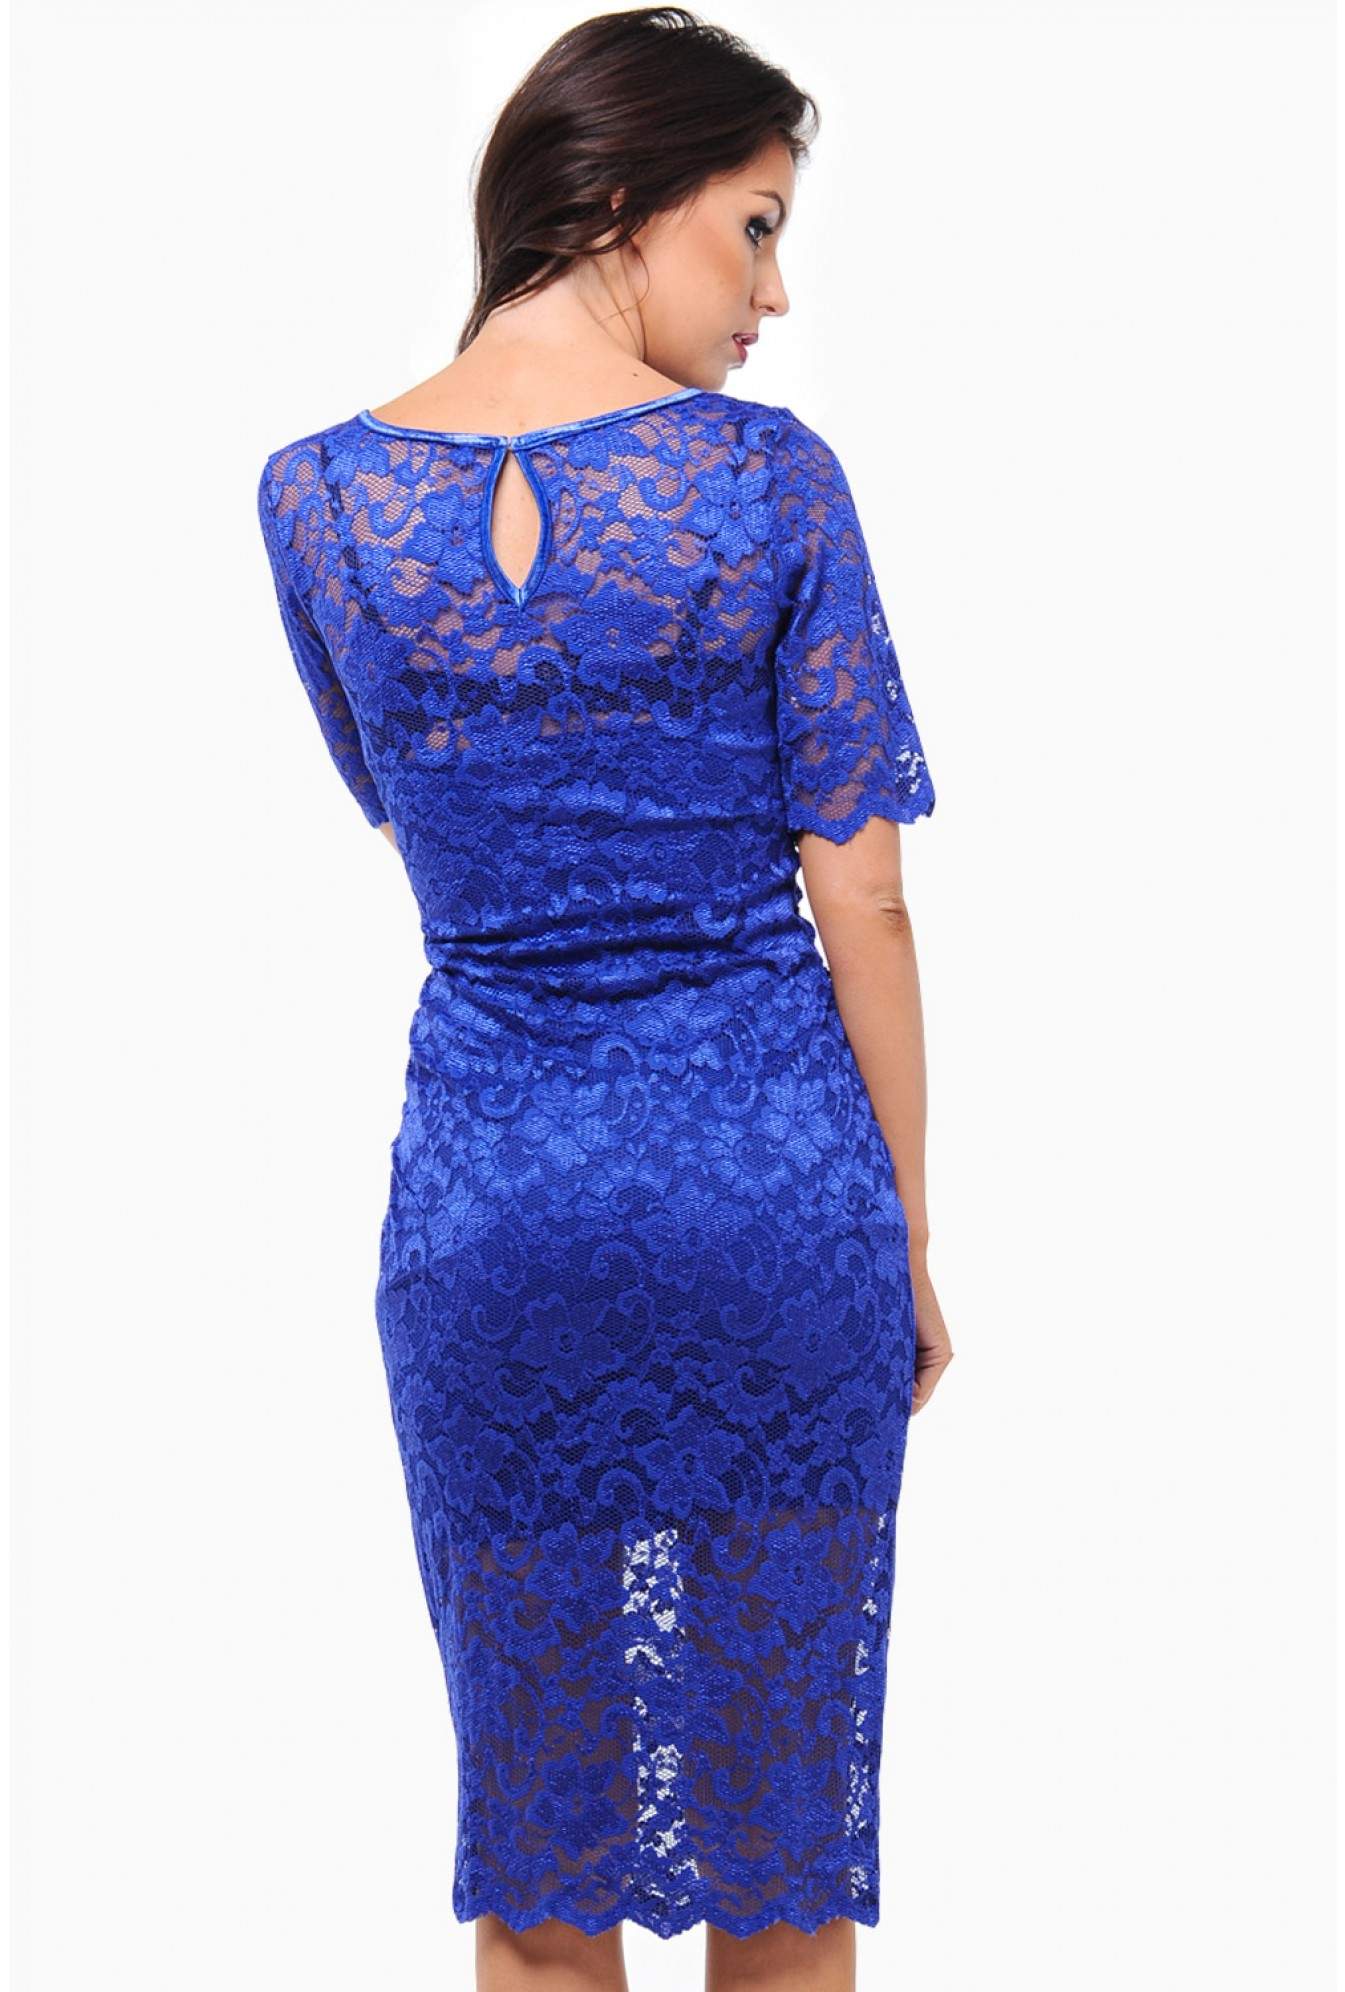 Katy Lace Dress in Royal Blue | iCLOTHING